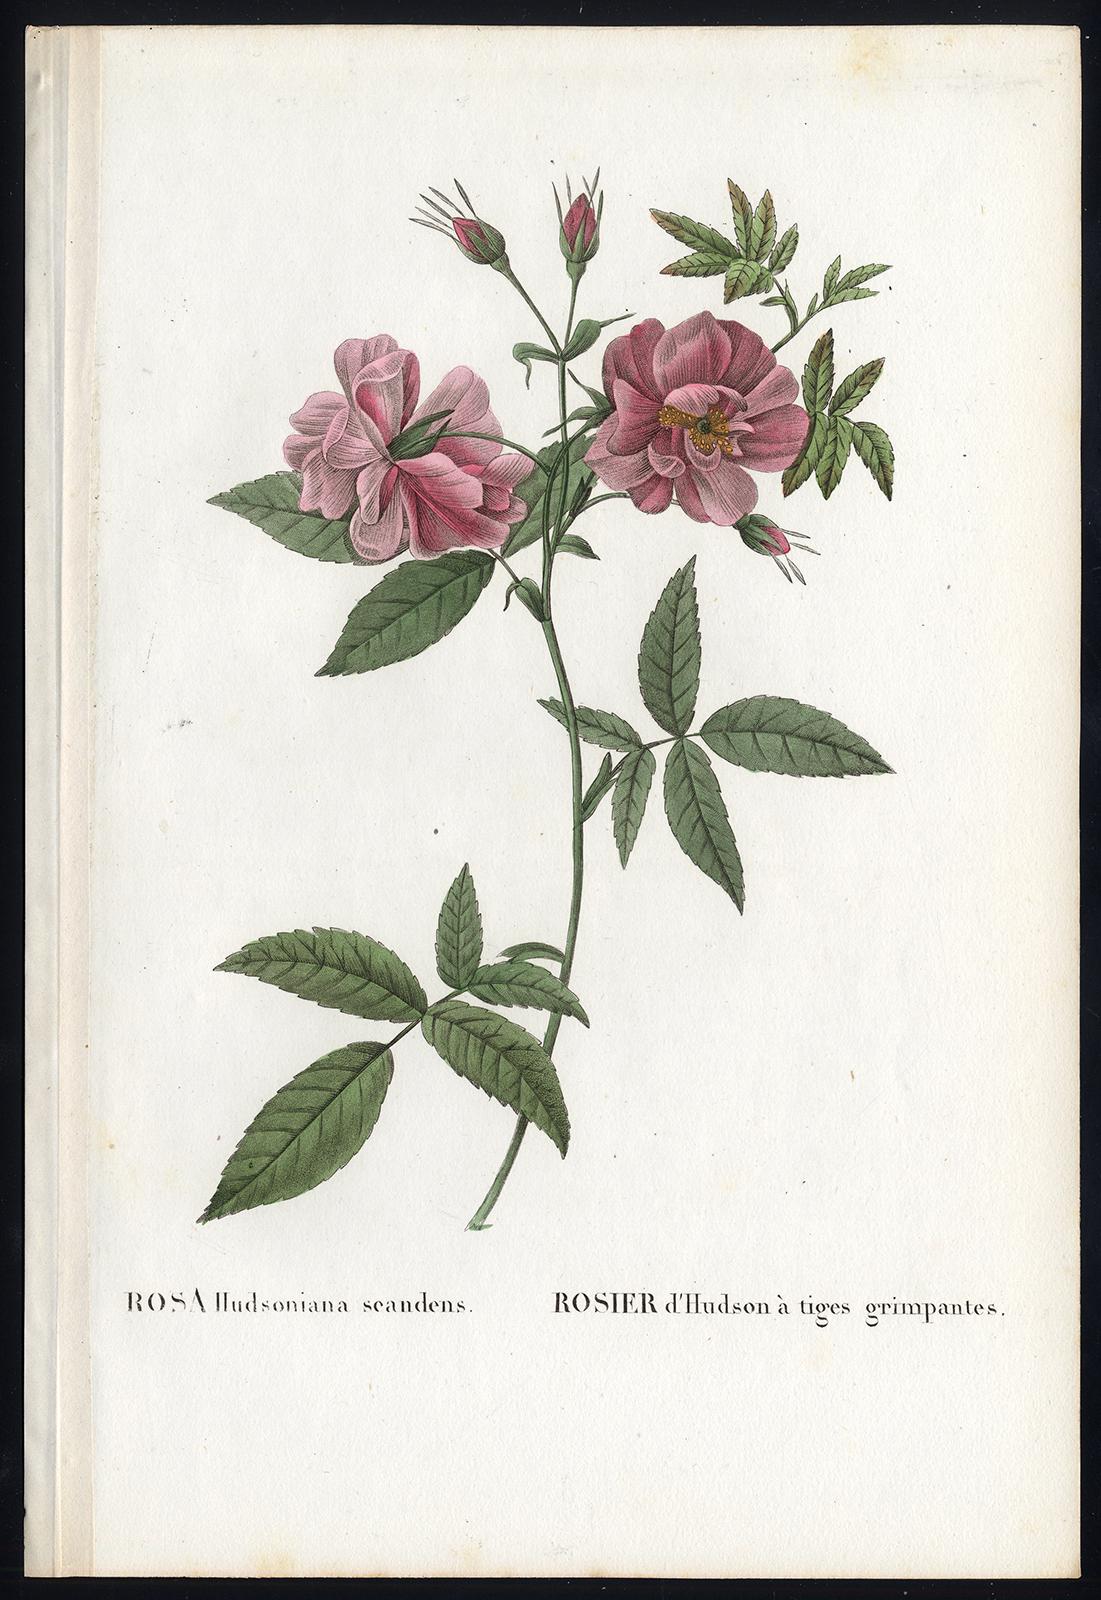 Pierre-Joseph Redouté Print - Marsh Rose by Redoute - Les Roses - Handcoloured engraving - 19th century